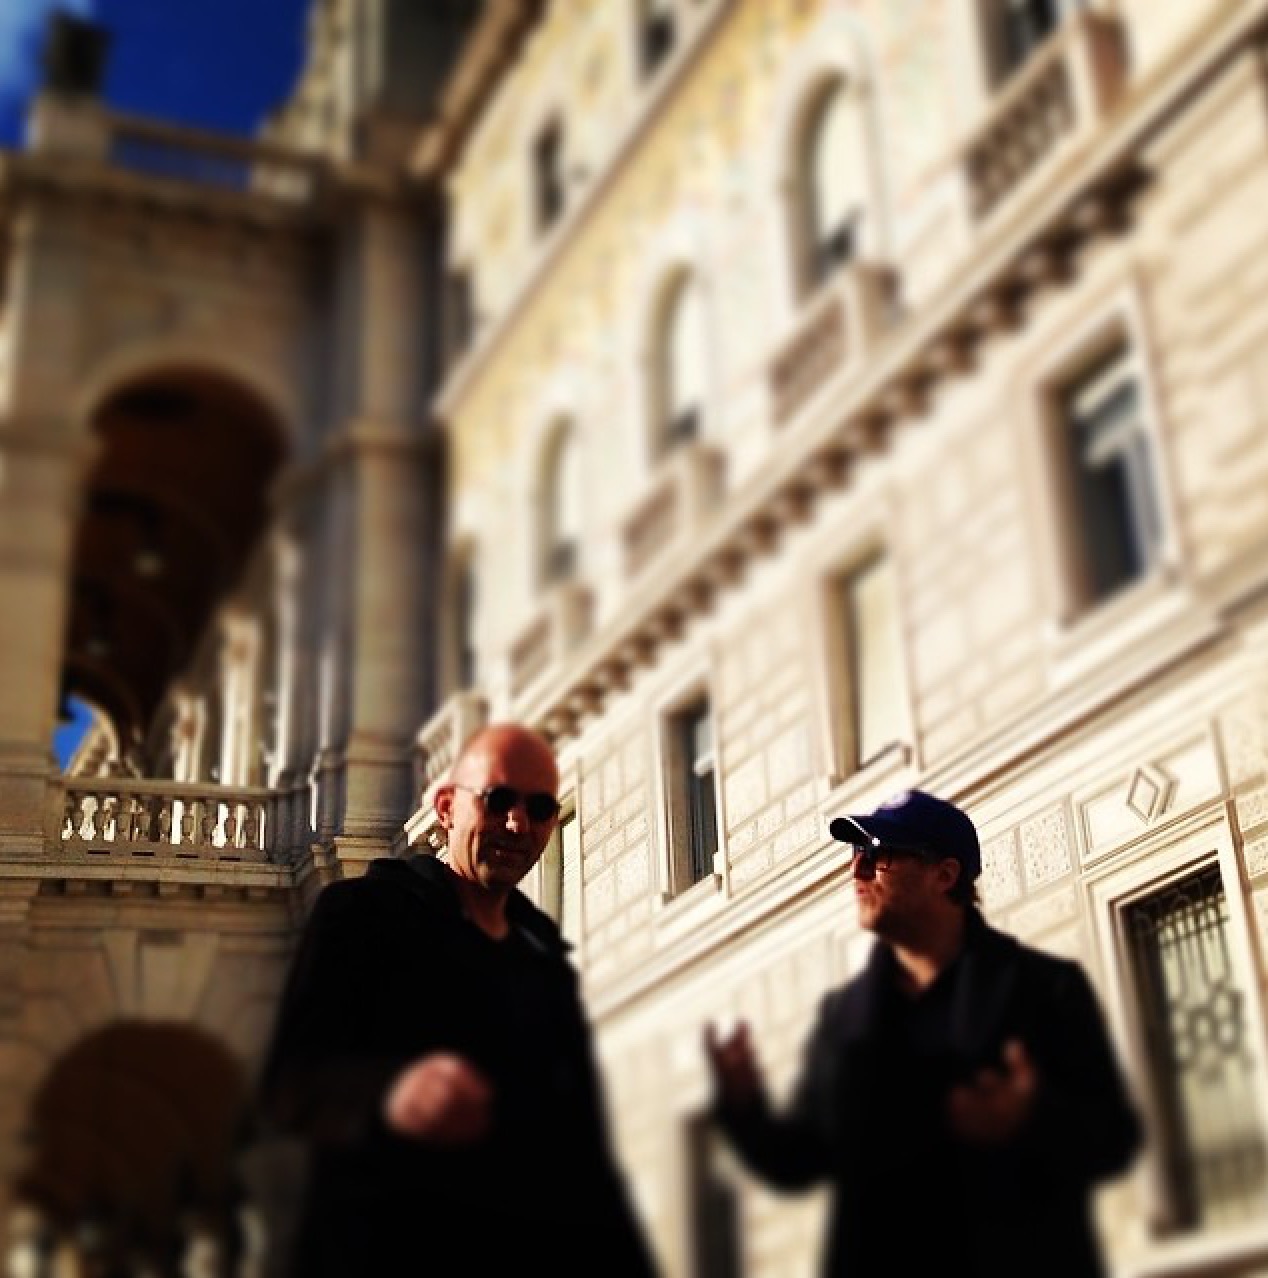 In Trieste, Italy with Reynald Gresset, april 2014